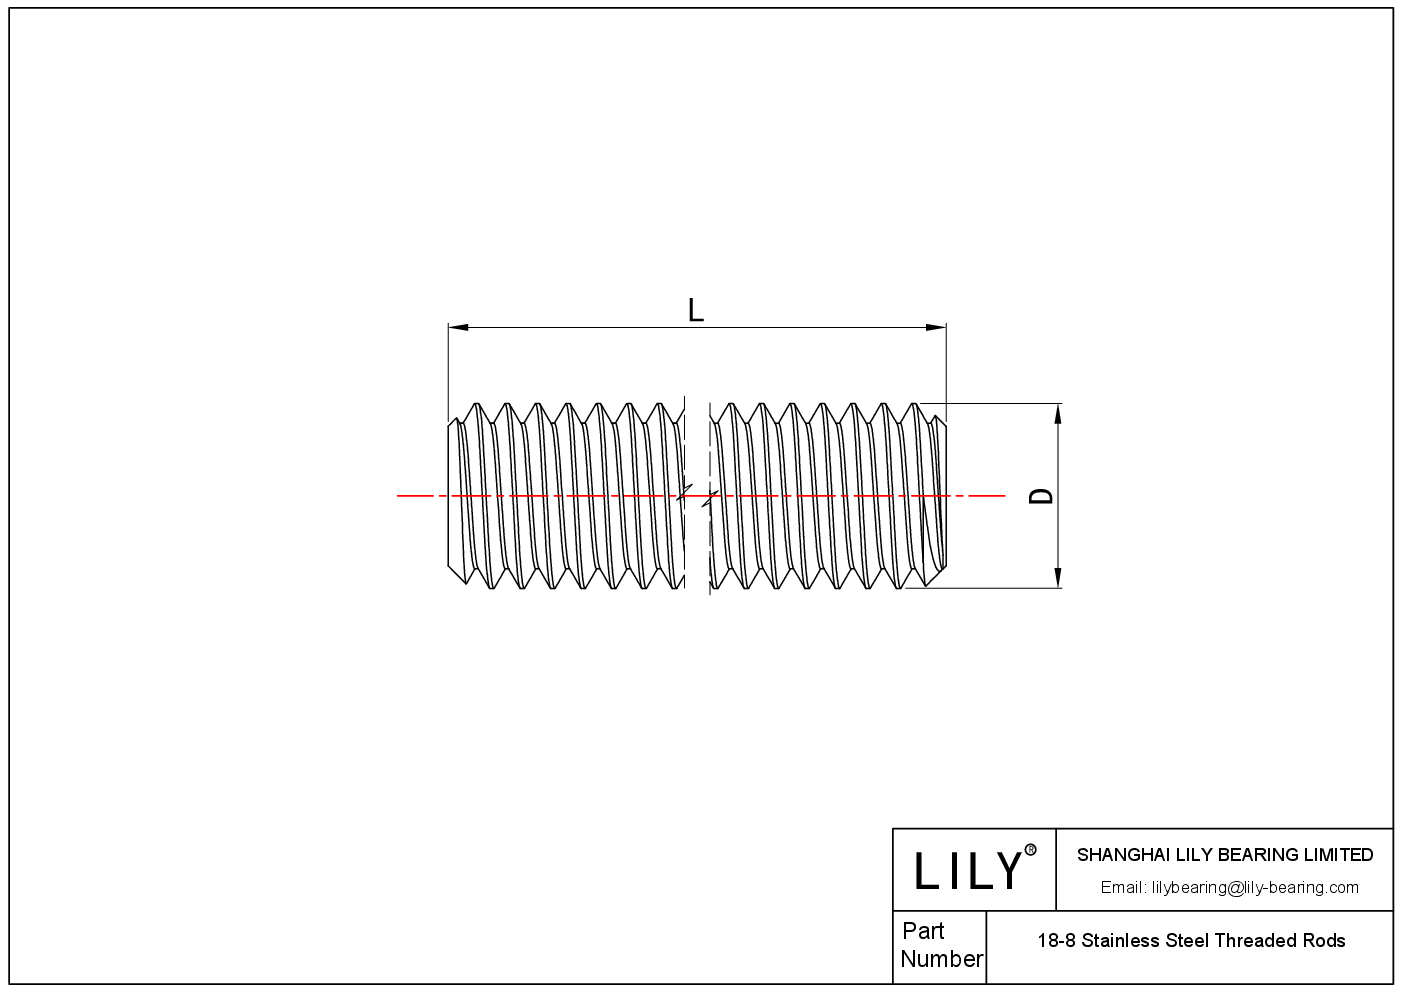 JFEBCADFA 18-8 Stainless Steel Threaded Rods cad drawing